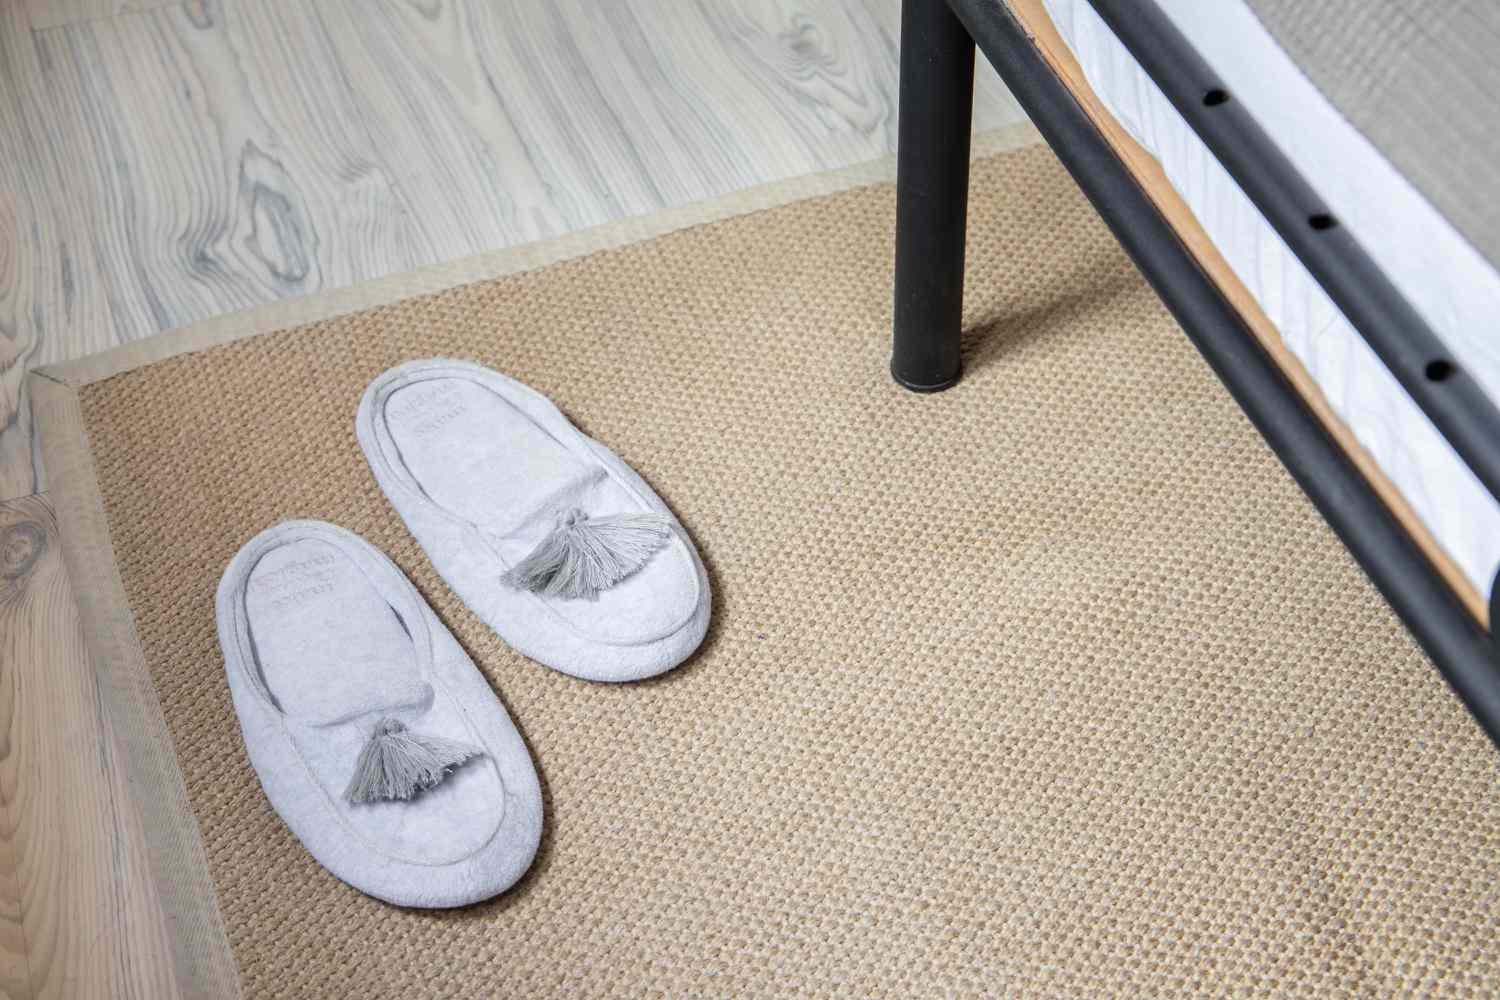 Tan rug with gray slippers on top underneath bed frame